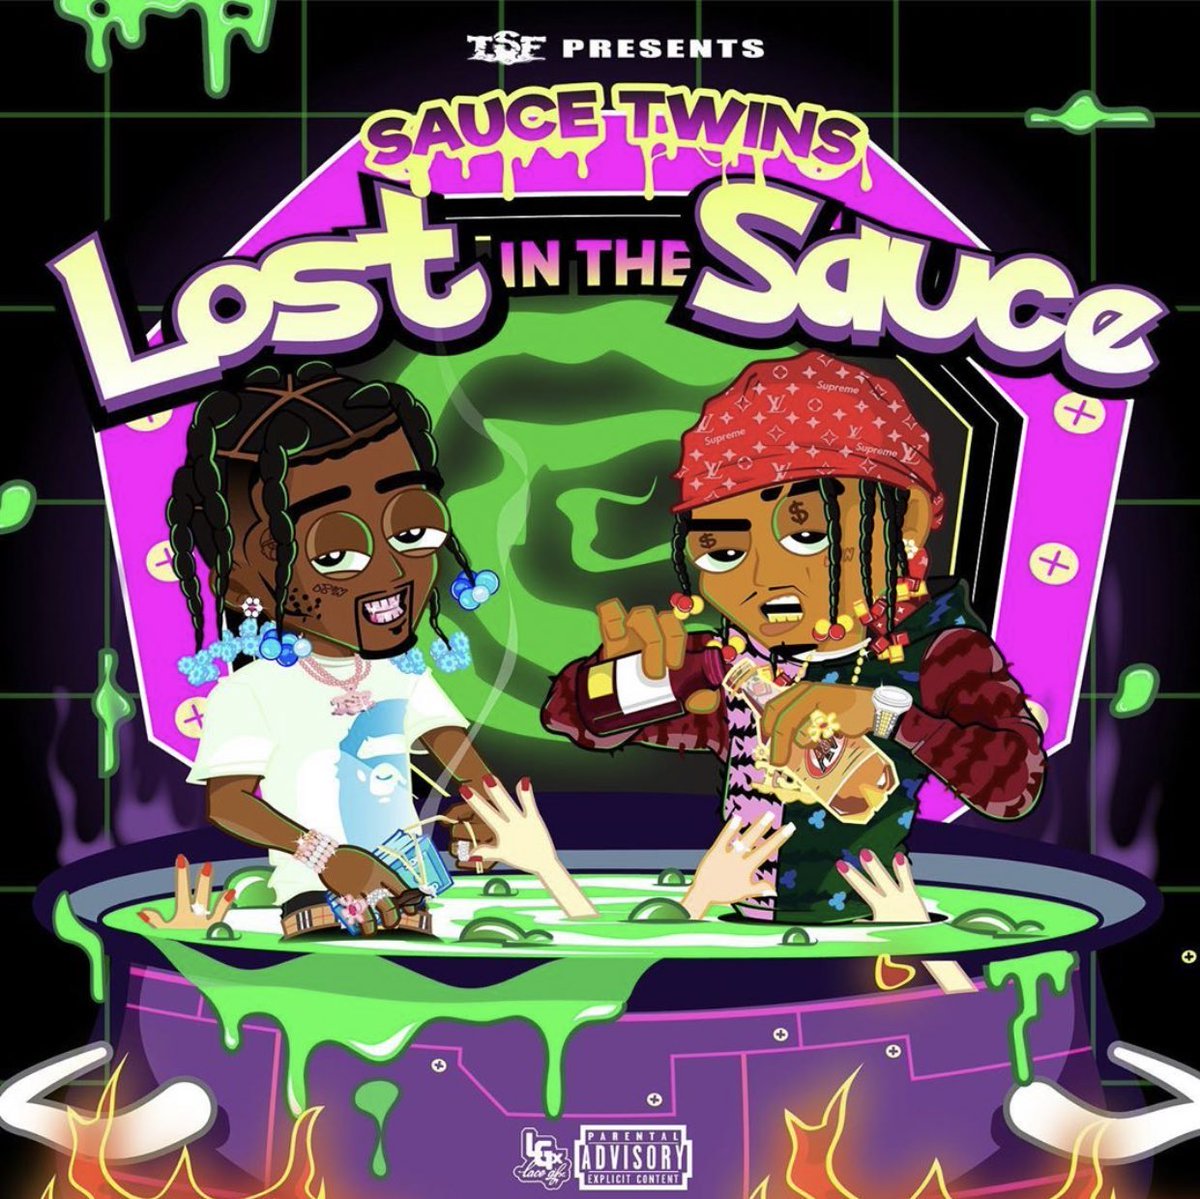 Sauce Twinz Return With 'Lost In The Sauce' Project